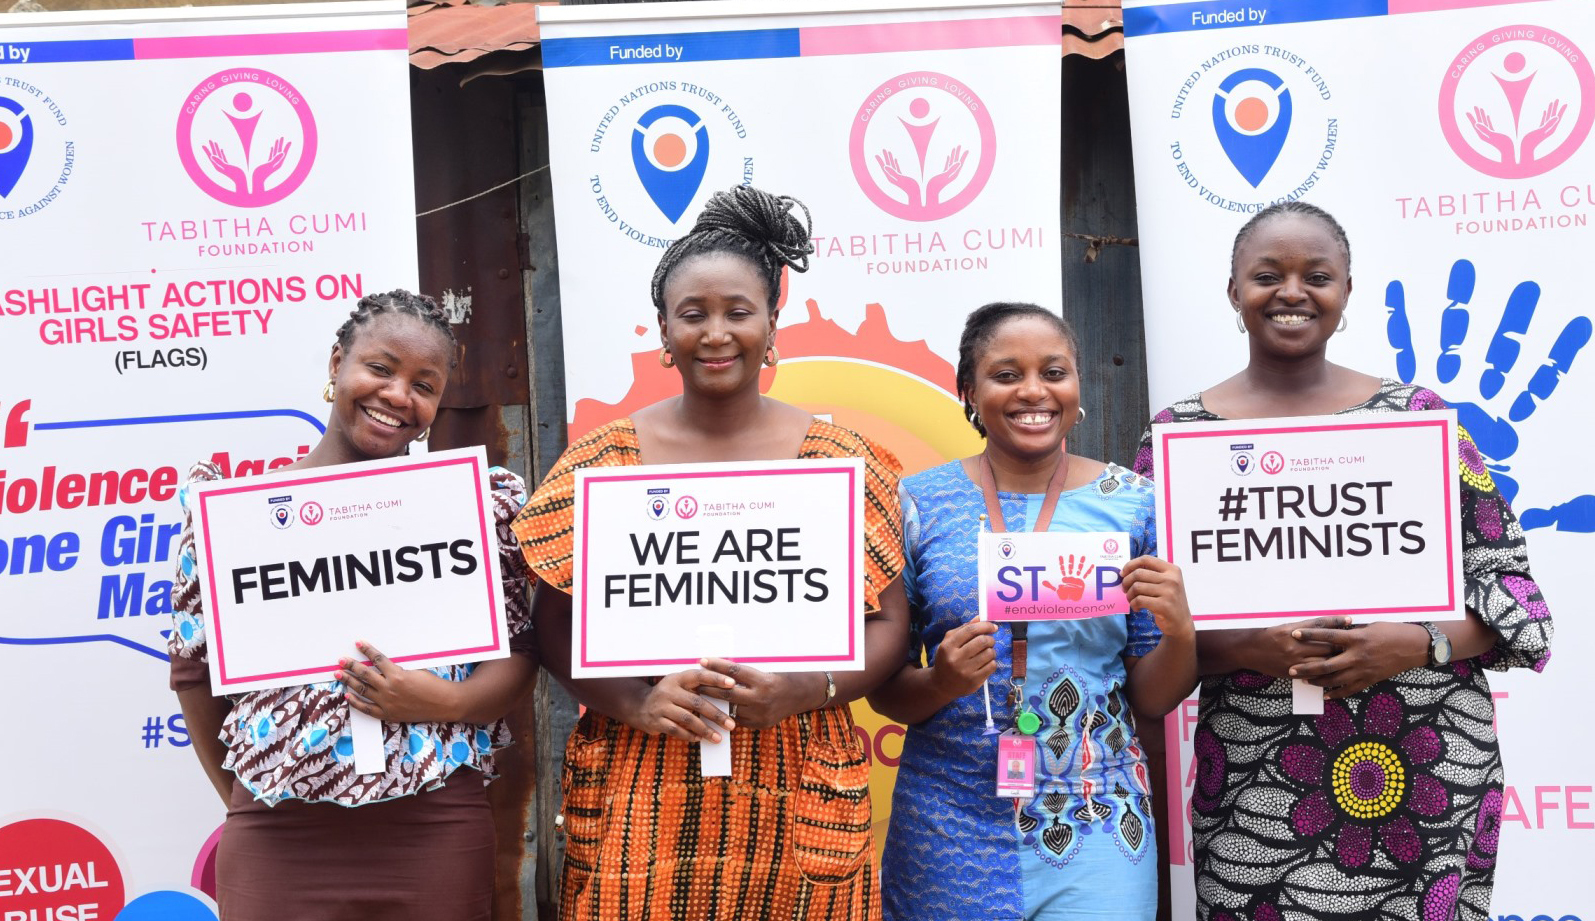 Four black women are standing outside, smiling, holding each a poster. One says "FEMINISTS", another one says "WE ARE FEMINISTS", then a smaller poster reads "STOP violence", and the last poster is the hashtag TrustFeminists